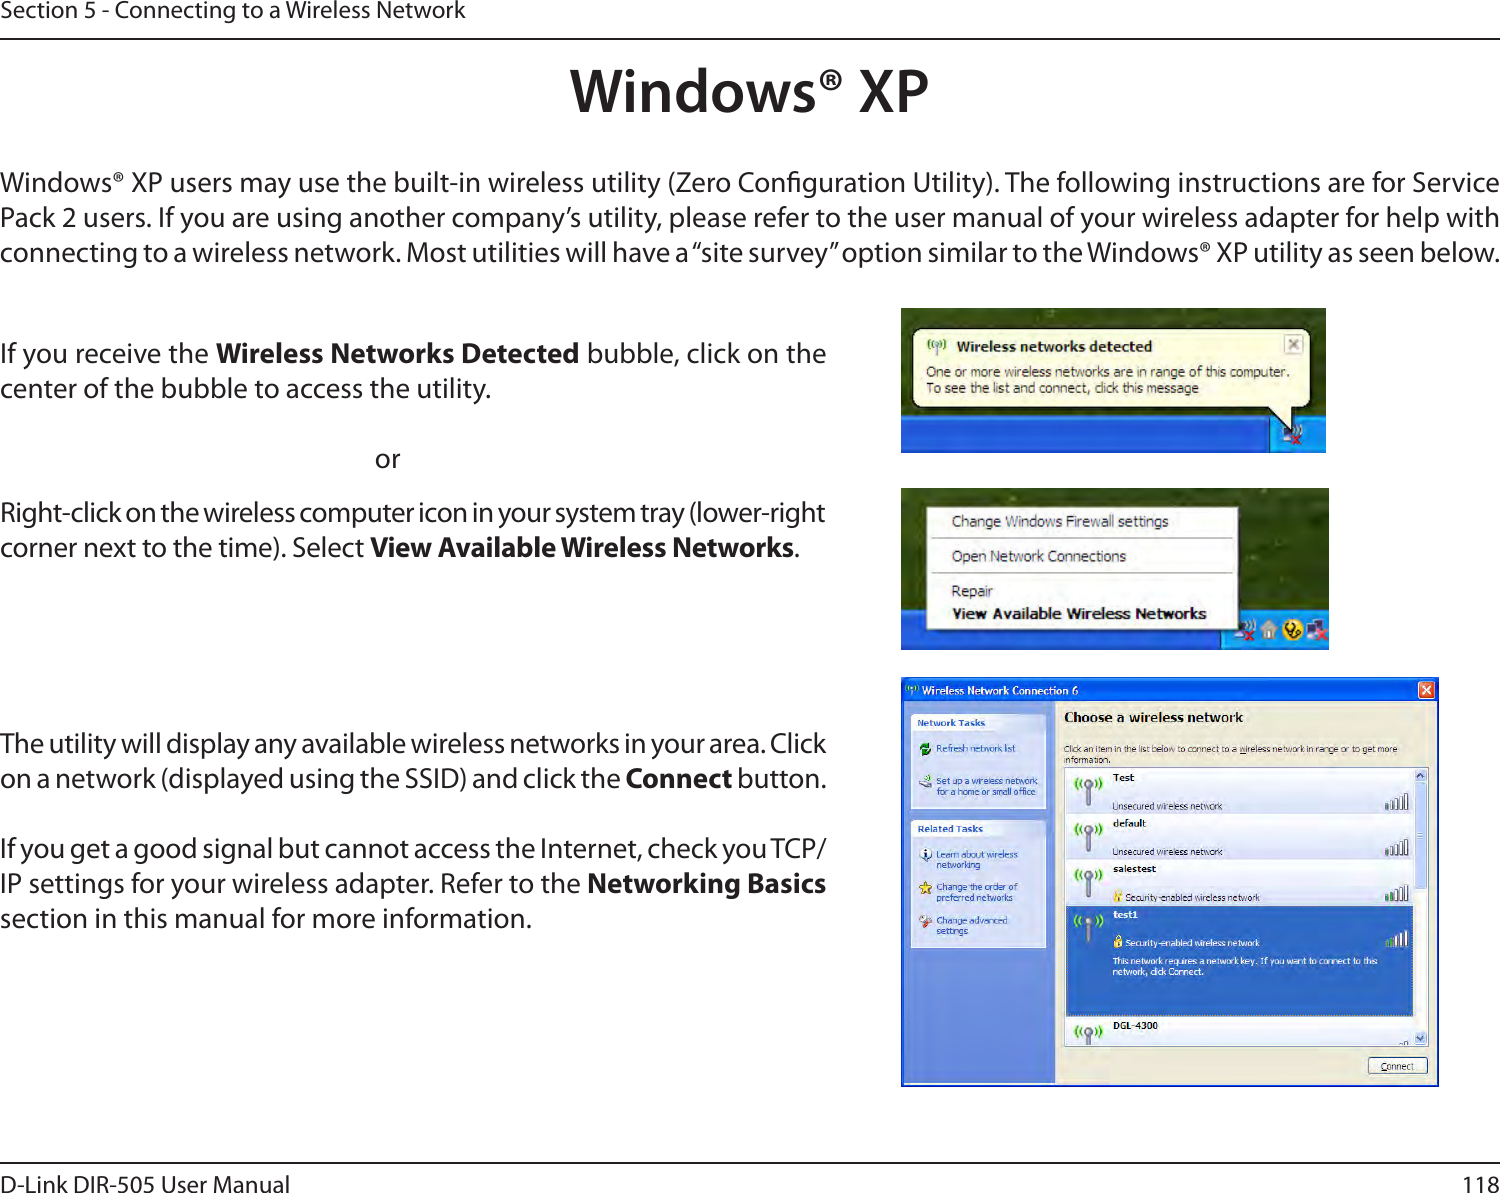 118D-Link DIR-505 User ManualSection 5 - Connecting to a Wireless NetworkWindows® XPWindows® XP users may use the built-in wireless utility (Zero Conguration Utility). The following instructions are for Service Pack 2 users. If you are using another company’s utility, please refer to the user manual of your wireless adapter for help with connecting to a wireless network. Most utilities will have a “site survey” option similar to the Windows® XP utility as seen below.Right-click on the wireless computer icon in your system tray (lower-right corner next to the time). Select View Available Wireless Networks.If you receive the Wireless Networks Detected bubble, click on the center of the bubble to access the utility.     orThe utility will display any available wireless networks in your area. Click on a network (displayed using the SSID) and click the Connect button.If you get a good signal but cannot access the Internet, check you TCP/IP settings for your wireless adapter. Refer to the Networking Basics section in this manual for more information.